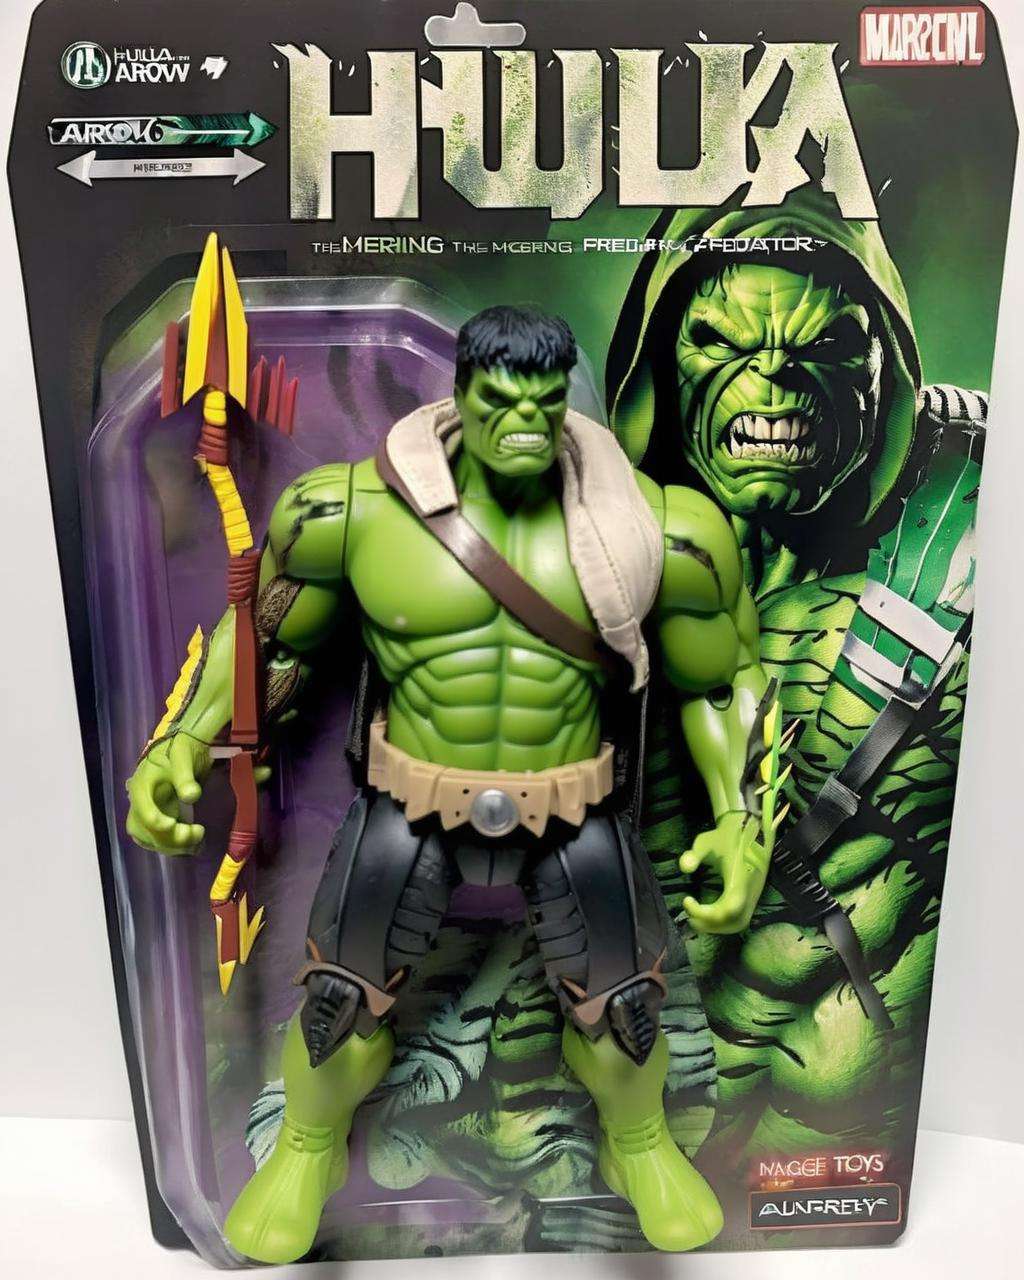 Preda-Hulk Arrow: Merging Predator, The Hulk, and Green Arrow, this action figure hunts with extraterrestrial cunning:0.3, unleashes unstoppable rage:0.3, and showcases archery precision:0.3. , awe_toys<lora:Awe_Toys:1.0>